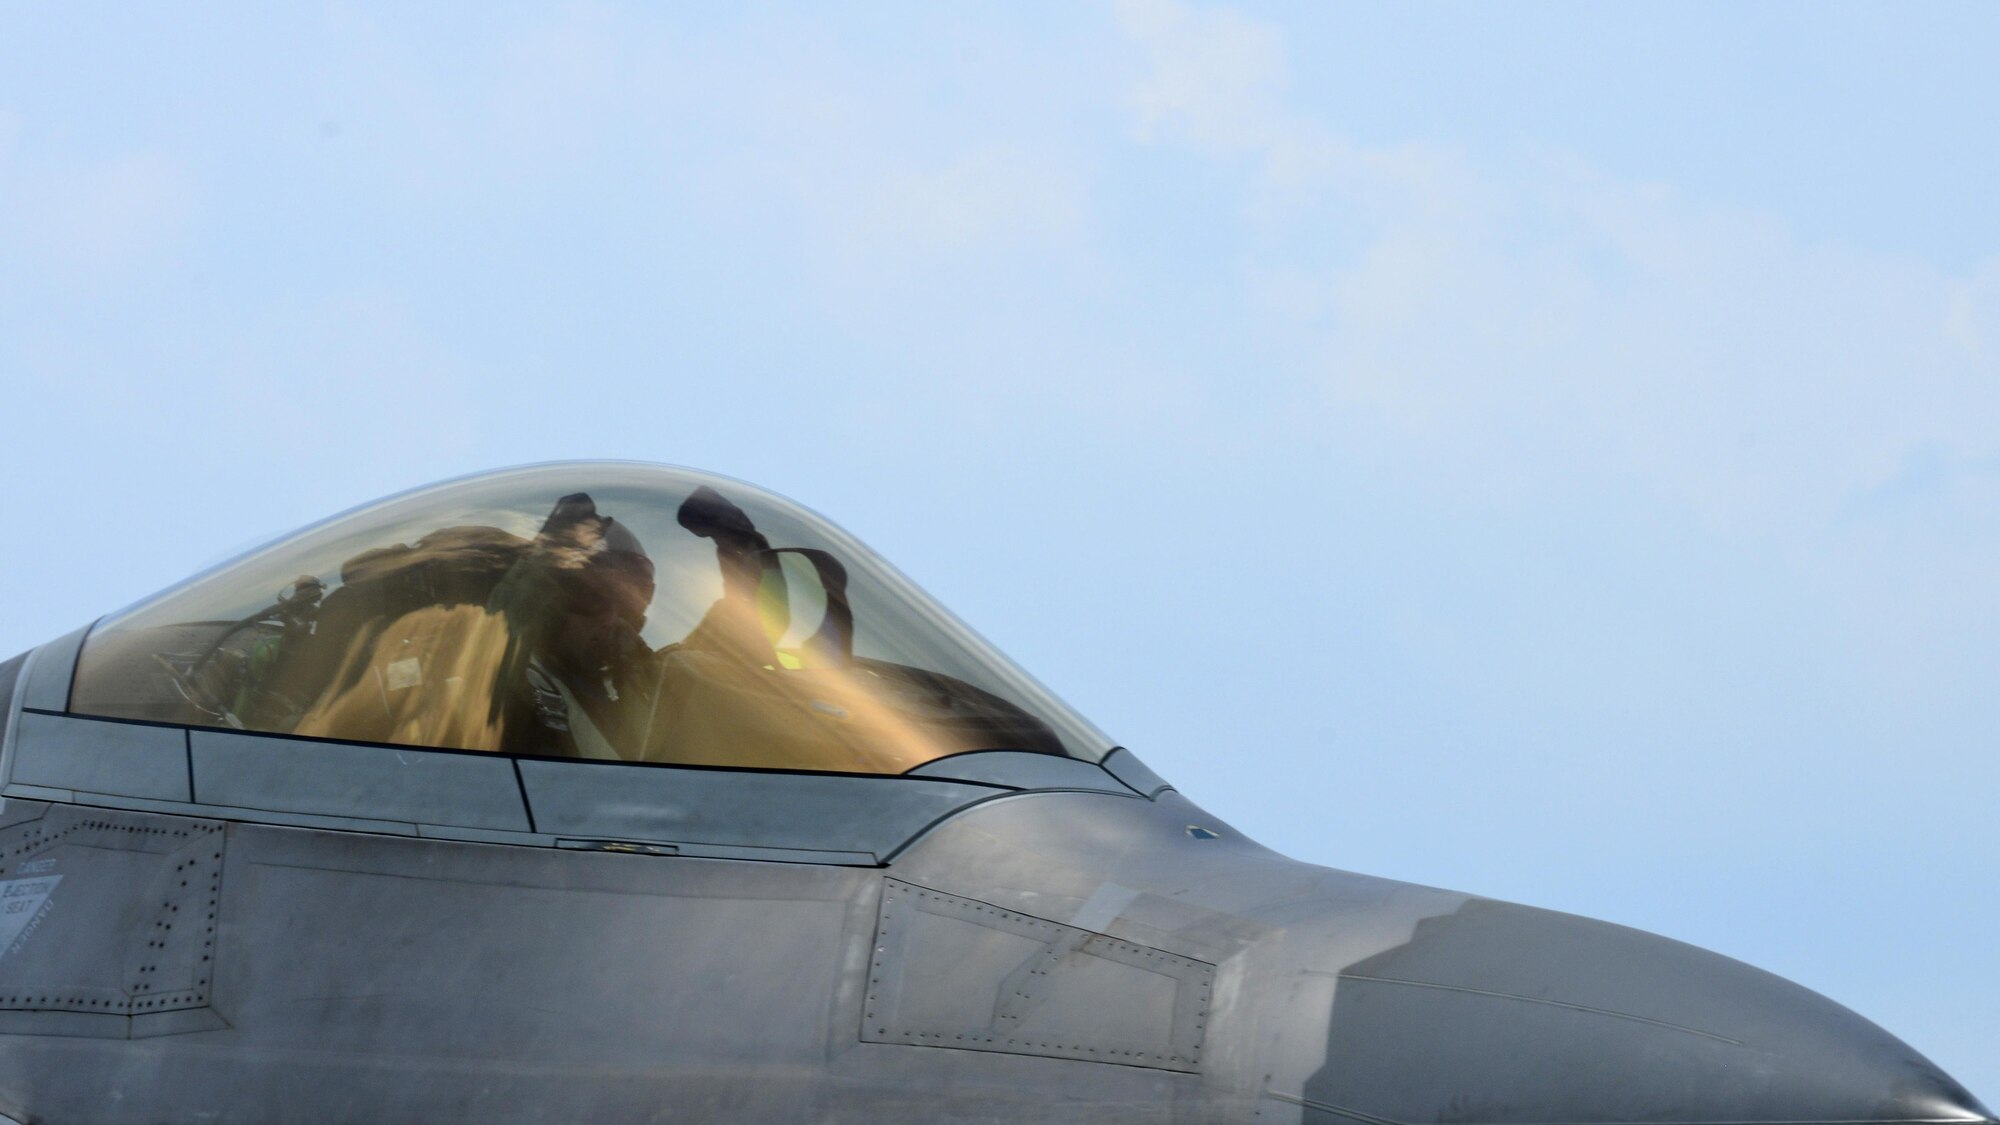 A U.S. Air Force F-22 Raptor pilot from the 1st Fighter Wing taxis on the flight line at Langley Air Force, Va., following a 95th Anniversary Maj. Gen. William “Billy” Mitchell memorial reenactment, July 22, 2016. In honor of Mitchell, pilots from across the Air Force gathered to reenact Mitchell’s airpower trials which demonstrated aviation’s place in the U.S. military on July 21, 1921. (U.S. Air Force photo by Staff Sgt. R. Alex Durbin)